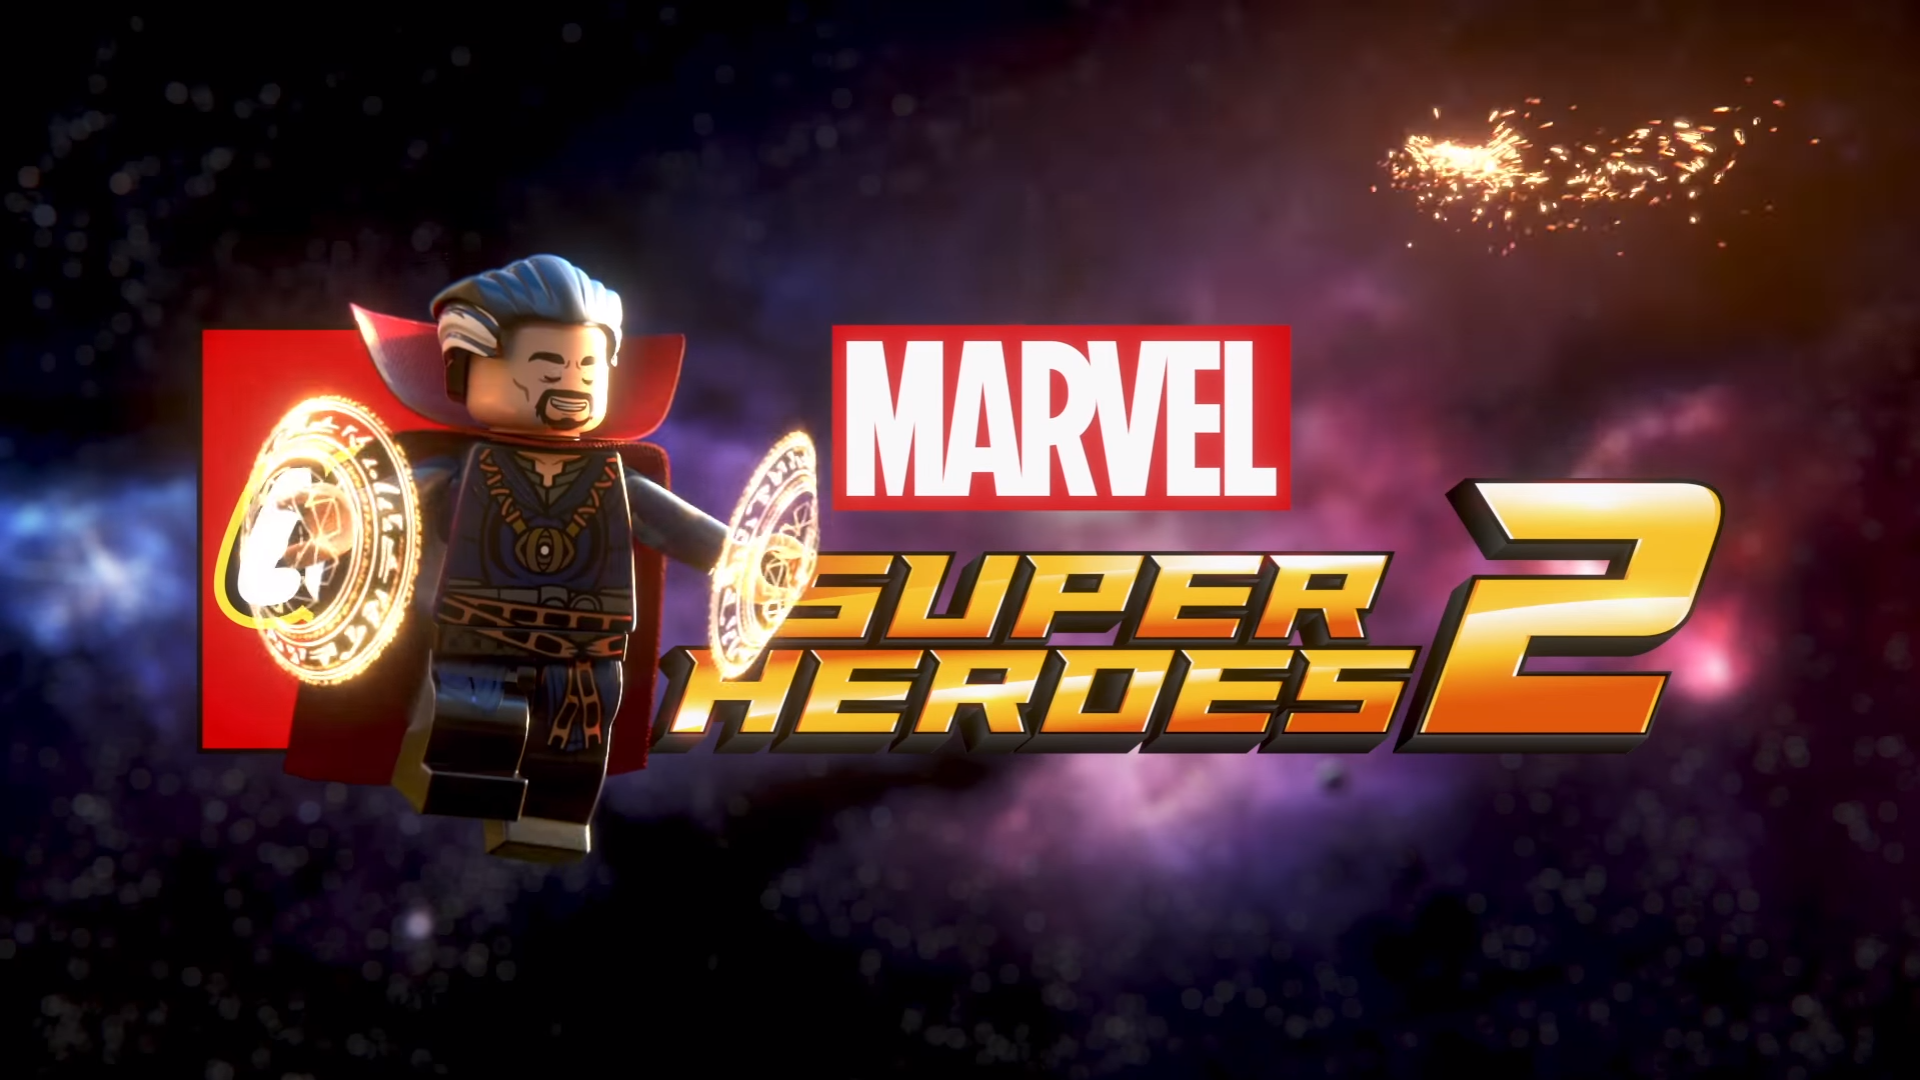 Lego Marvel Super Heroes Wallpaper Image Photos Pictures